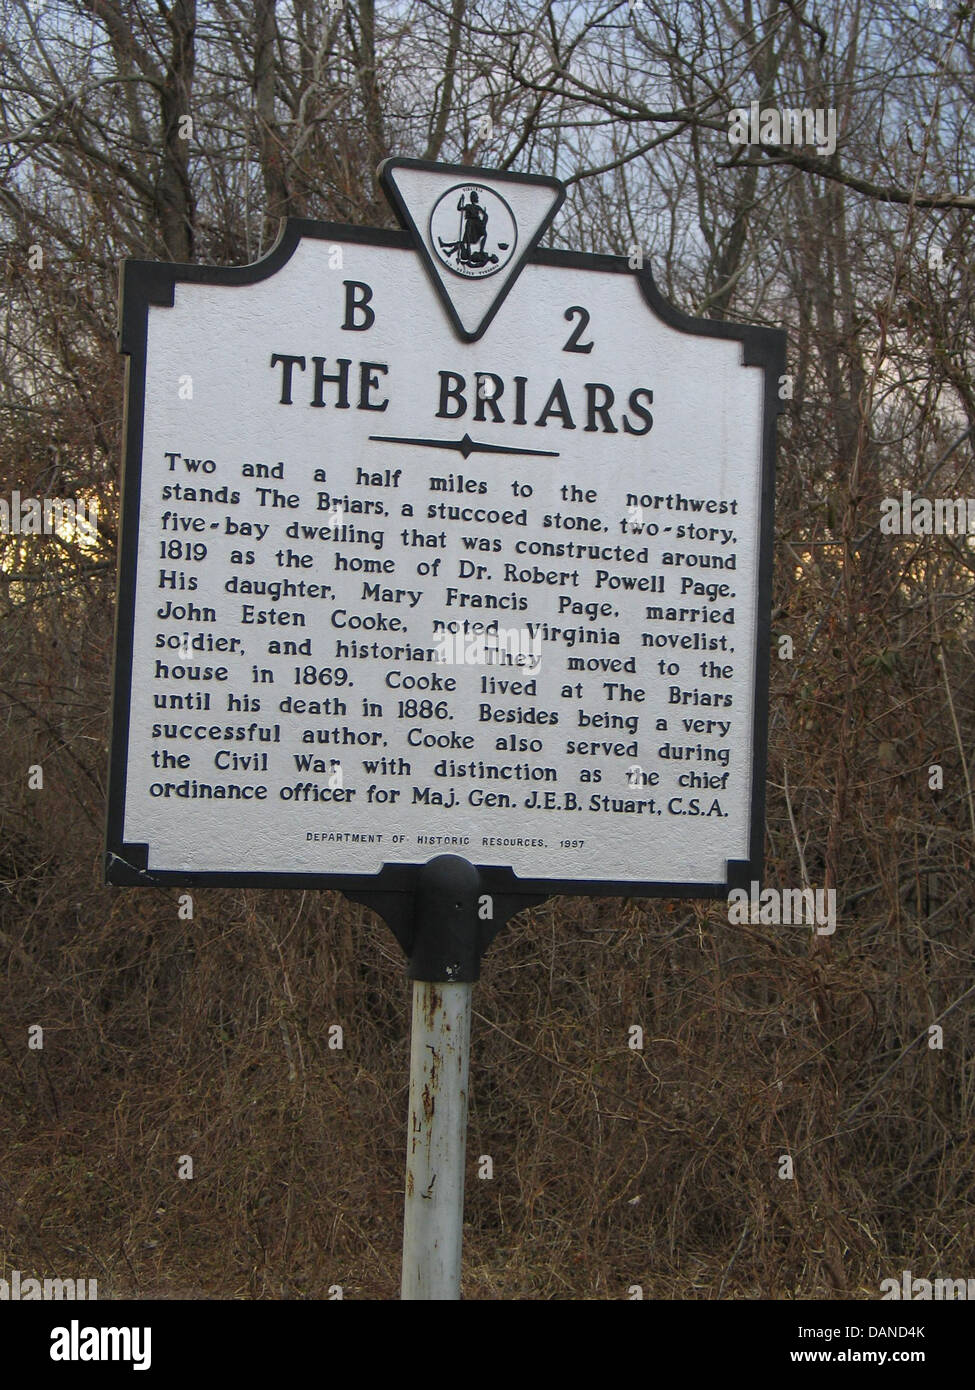 THE BRIARS Two and a half miles to the northwest stands The Briars, a stuccoed stone, two-story, five-bay dwelling that was constructed around 1819 as the home of Dr. Robert Powell Page. His daughter, Mary Francis Page, married John Esten Cooke, noted Virginia novelist, soldier, and historian. They moved to the house in 1869. Cooke lived at The Briars until his death in 1886. Besides being a very successful author, Cooke also served during the Civil War with distinction as the chief ordinance officer for Maj. Gen. J.E.B. Stuart, C.S.A. Department of Historic Resources, 1997 Stock Photo